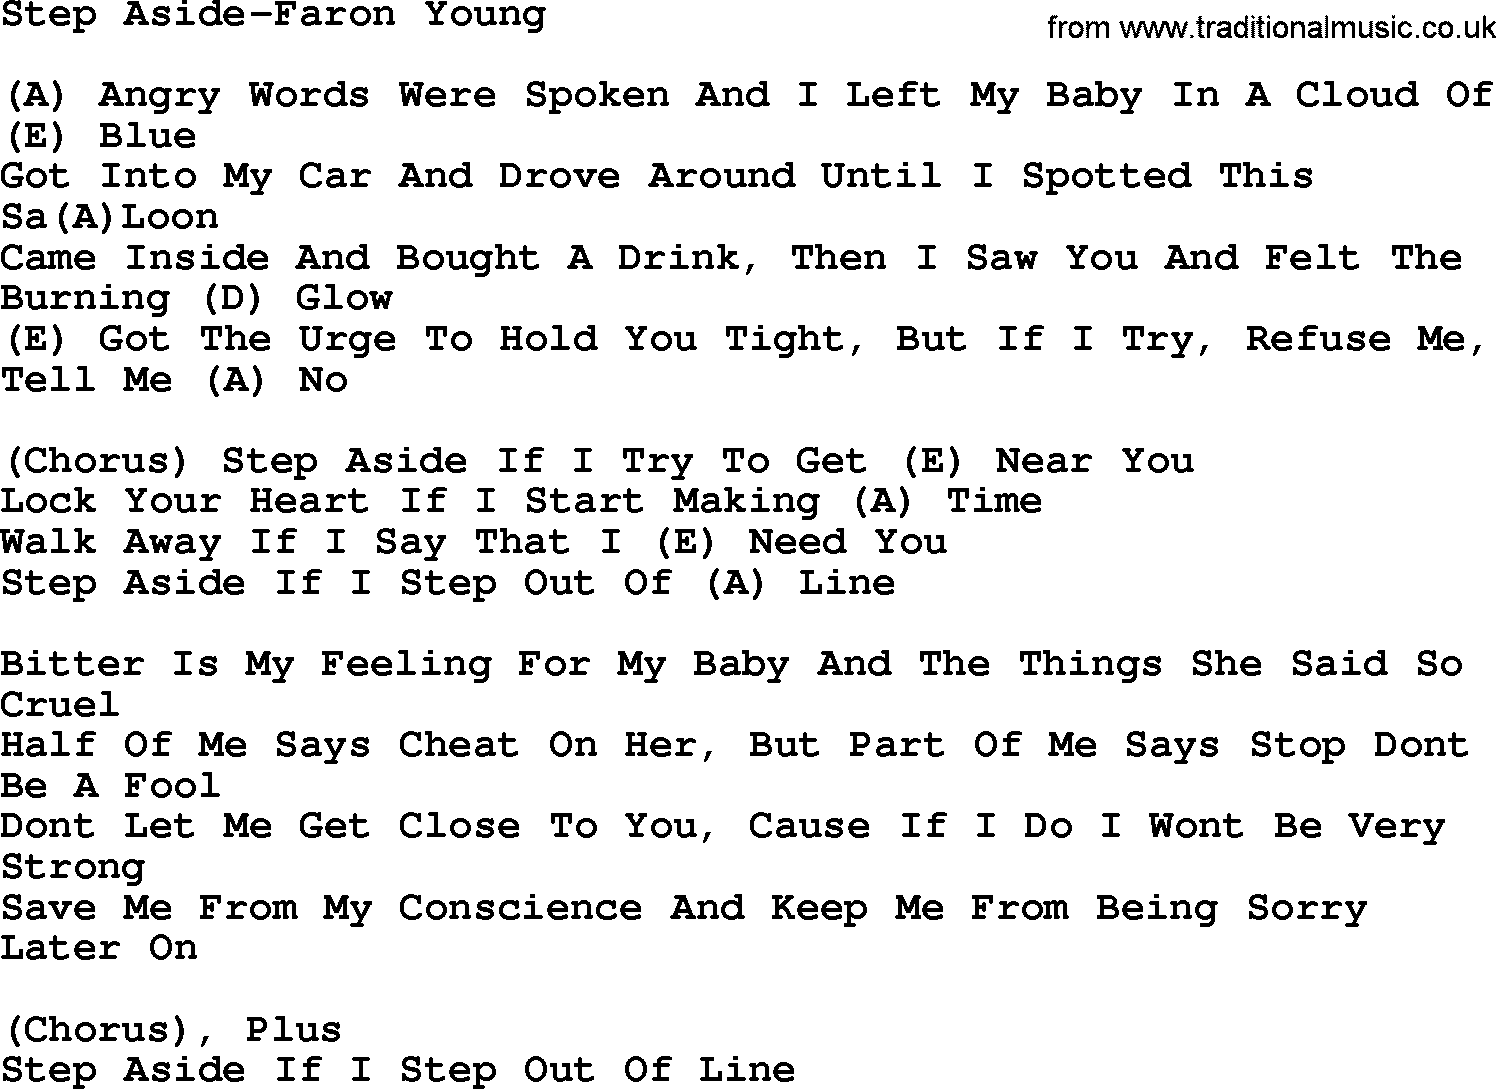 Country music song: Step Aside-Faron Young lyrics and chords